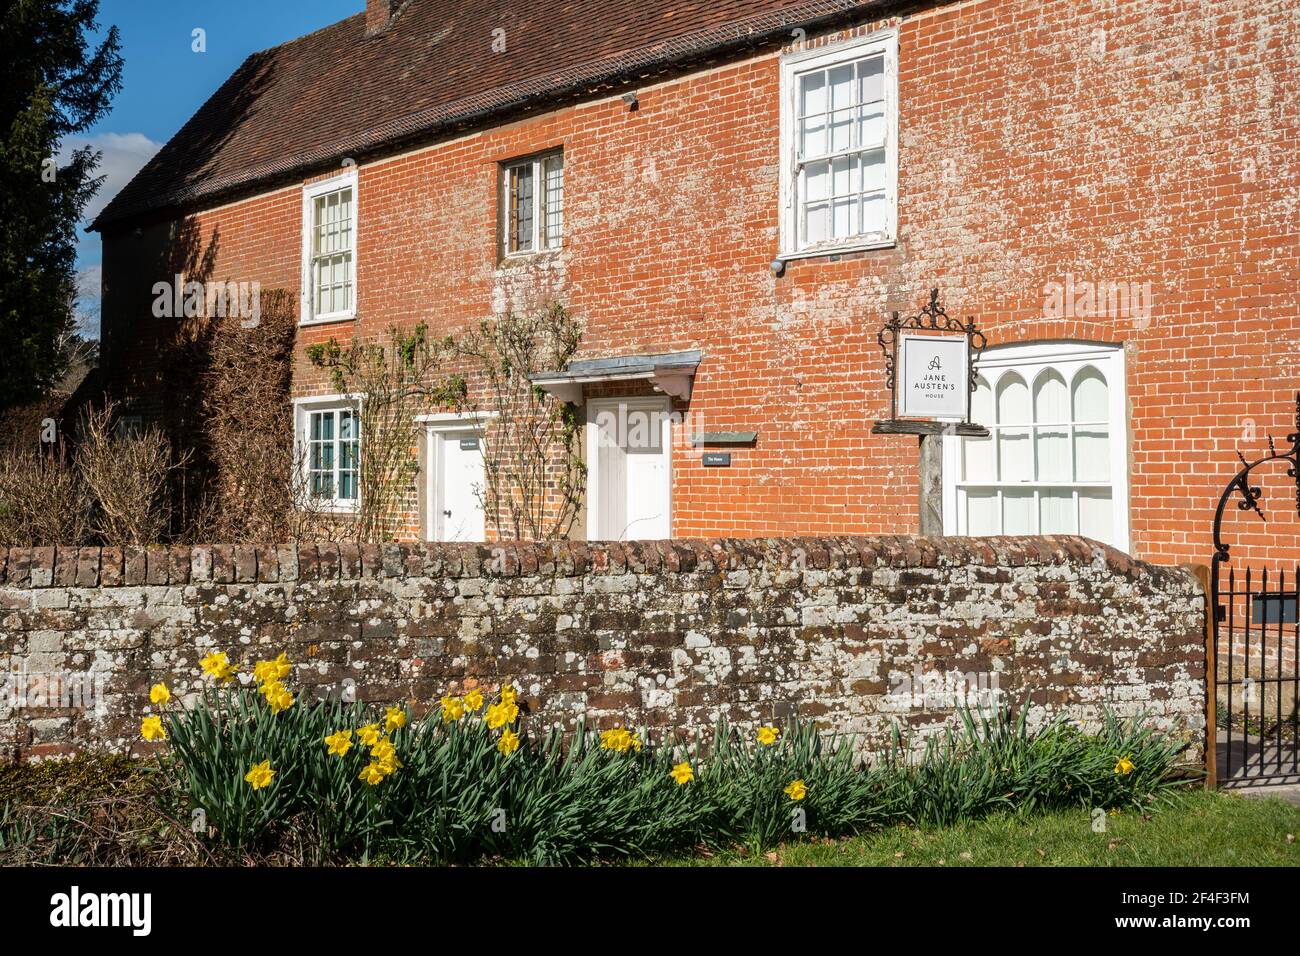 Jane Austen's House and museum in Chawton, Hampshire, England, UK, during spring with daffodils in flower Stock Photo